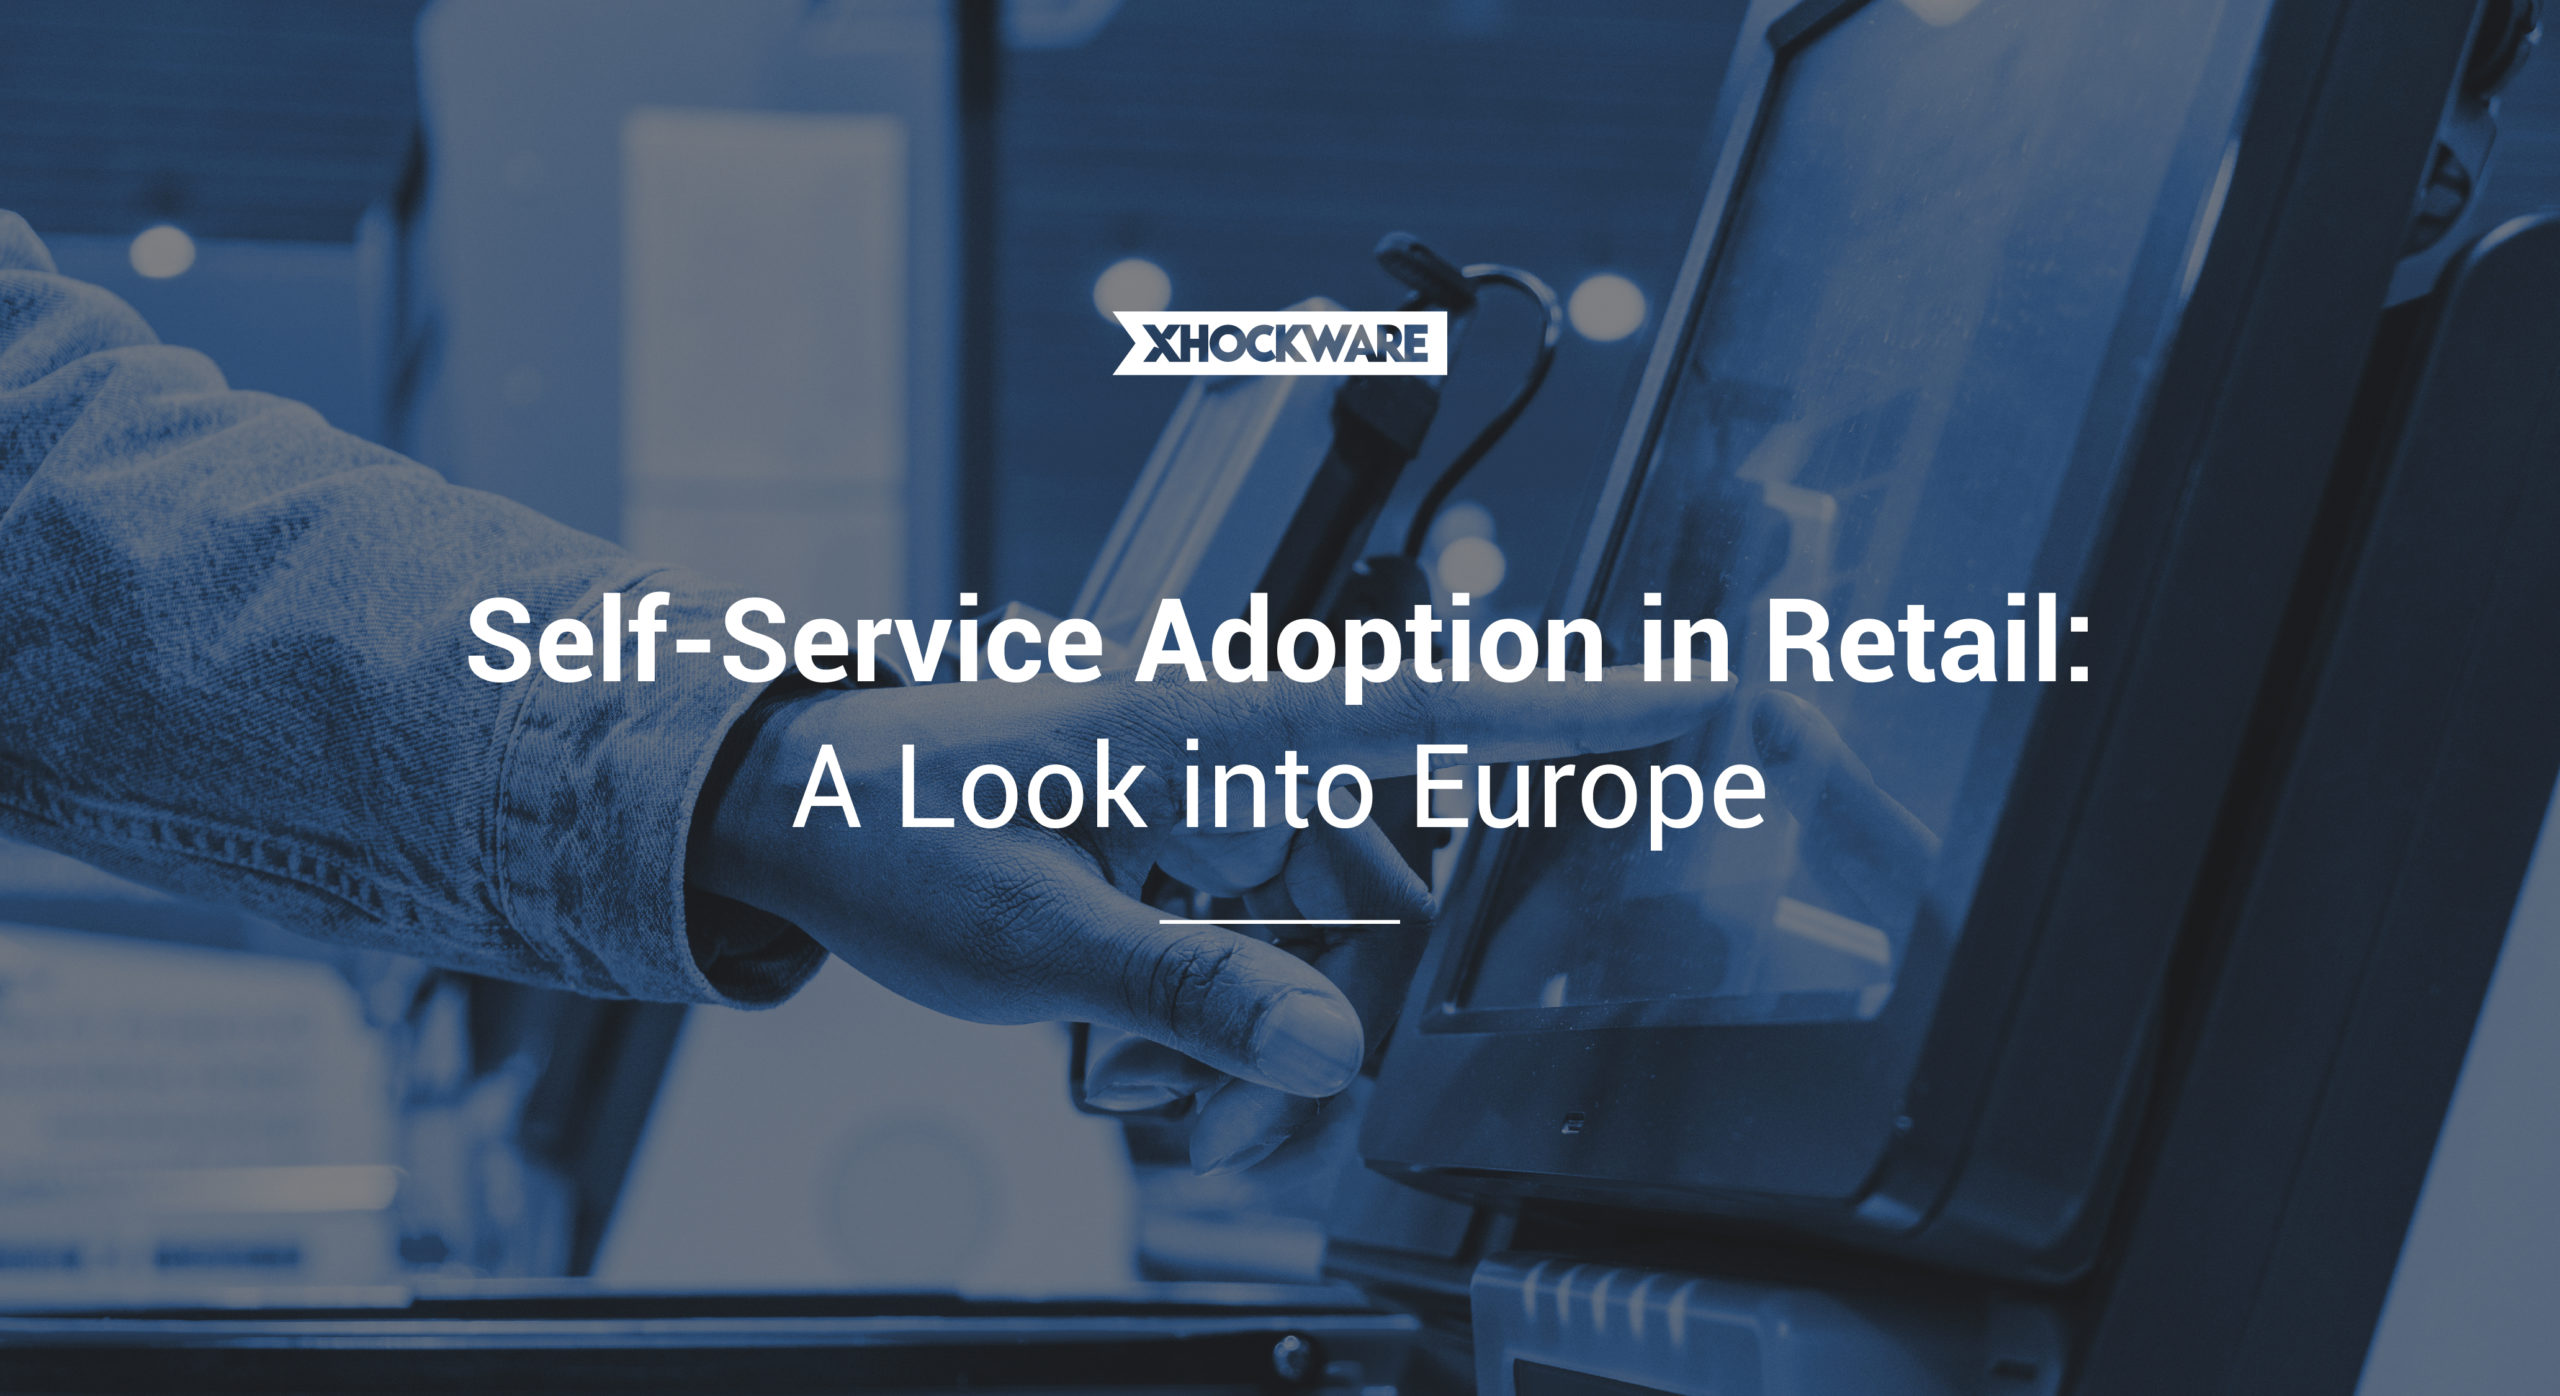 Self-Service Adoption in Retail: A Look into Europe